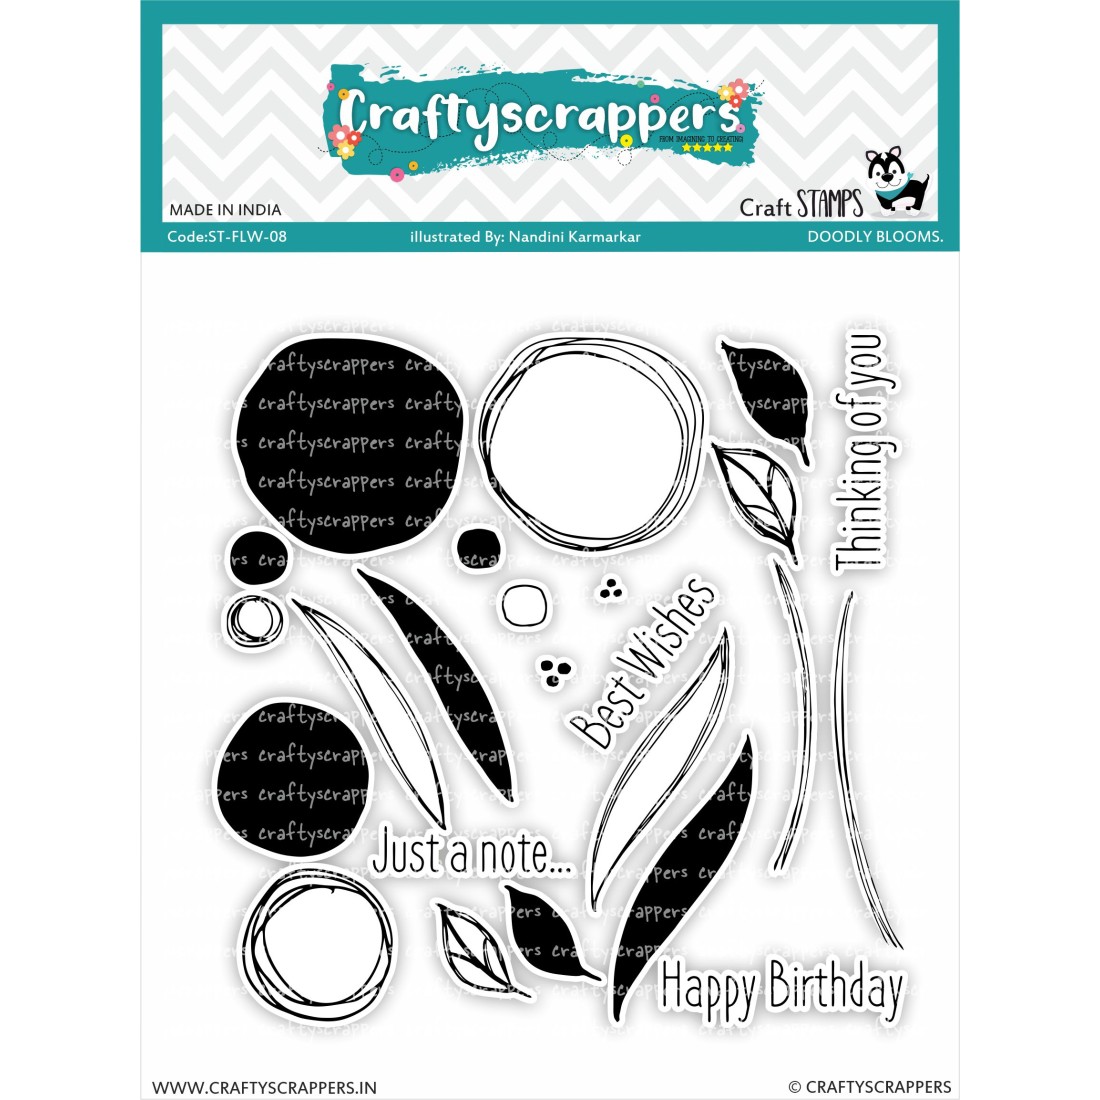 Craftyscrappers Stamps- DOODLY BLOOMS